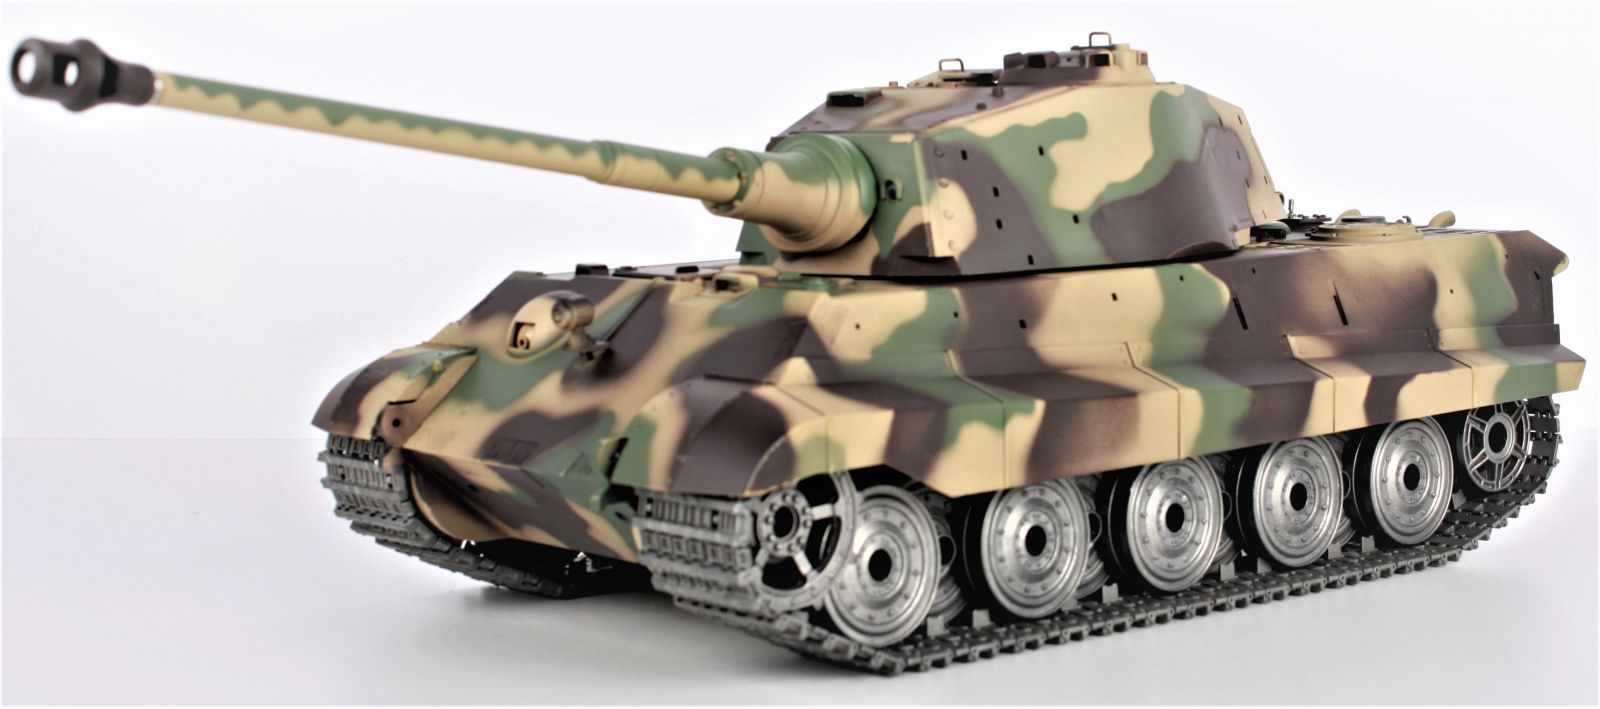 RC Tank 1:16 German King Tiger with smoke and sound effects, steel accessories and tracks, shoots bullets